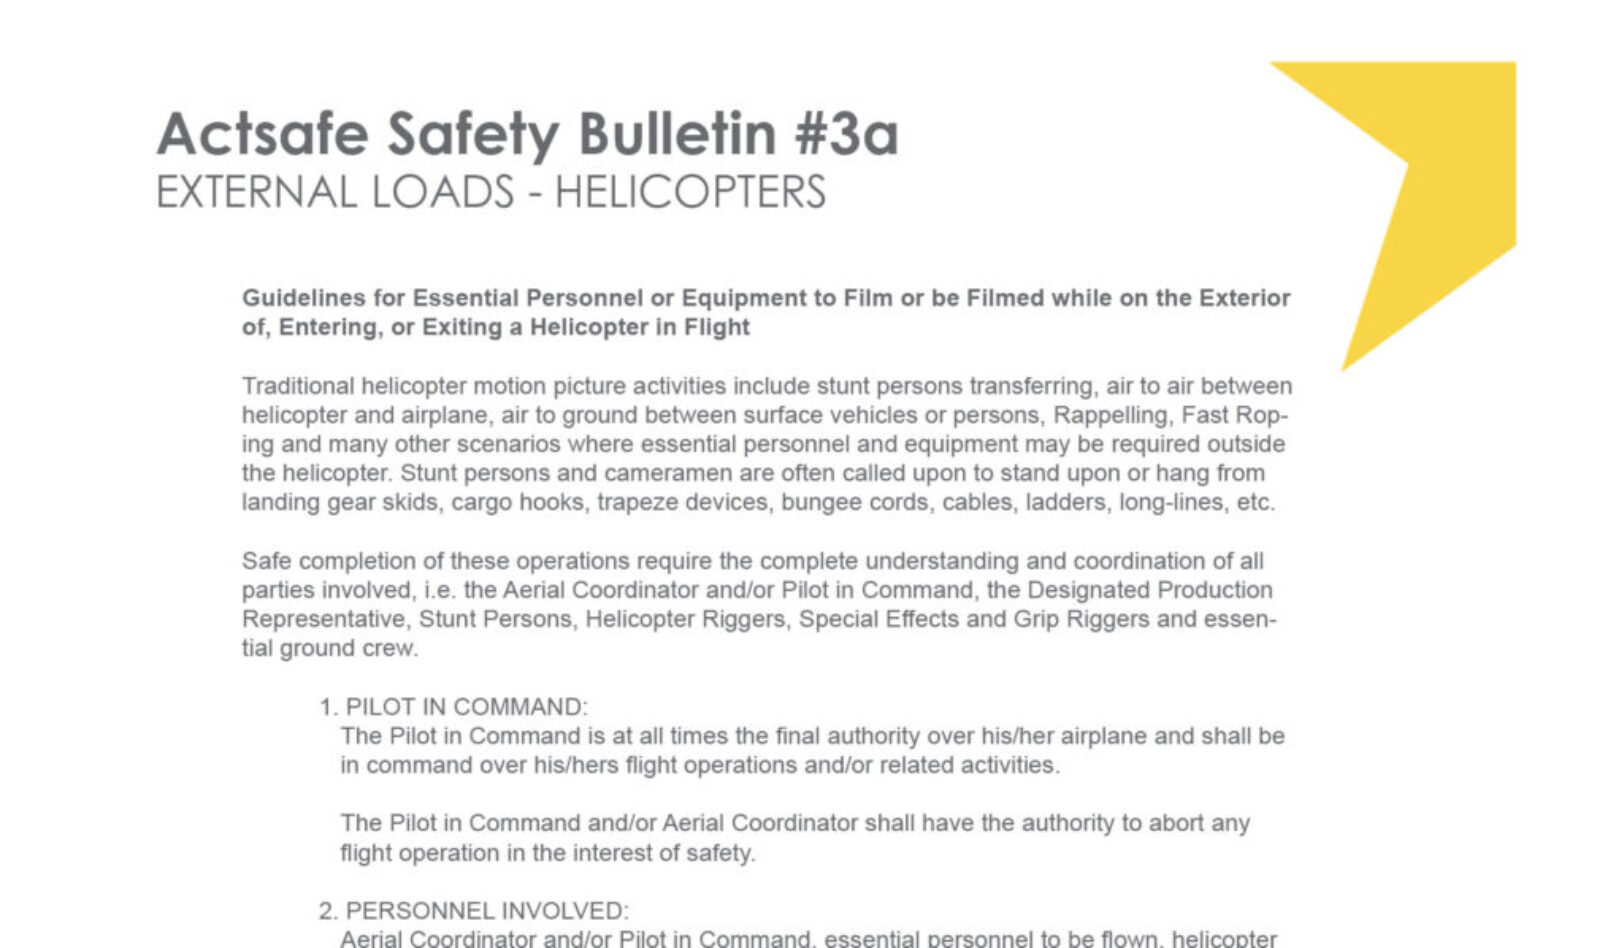 #3A Helicopters, Addendum “A” – External Load Guidelines Motion Picture Safety Bulletin